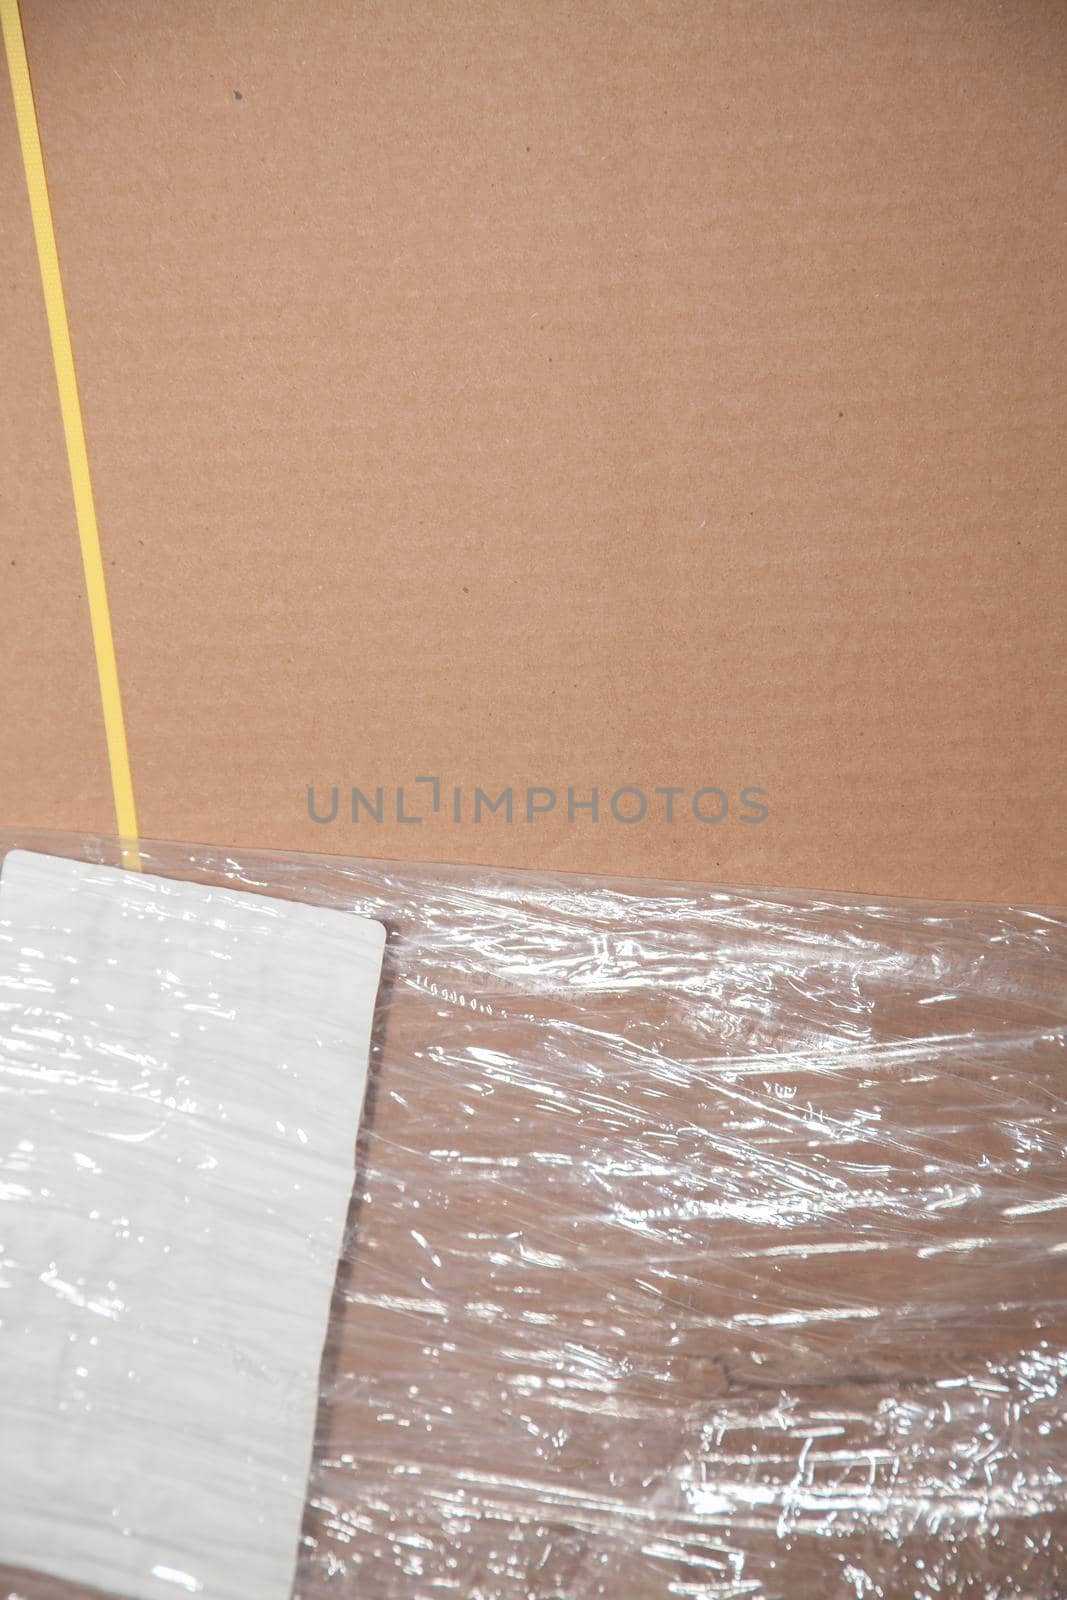 Unused, flattened cardboard boxes in an open plastic package with yellow bounding